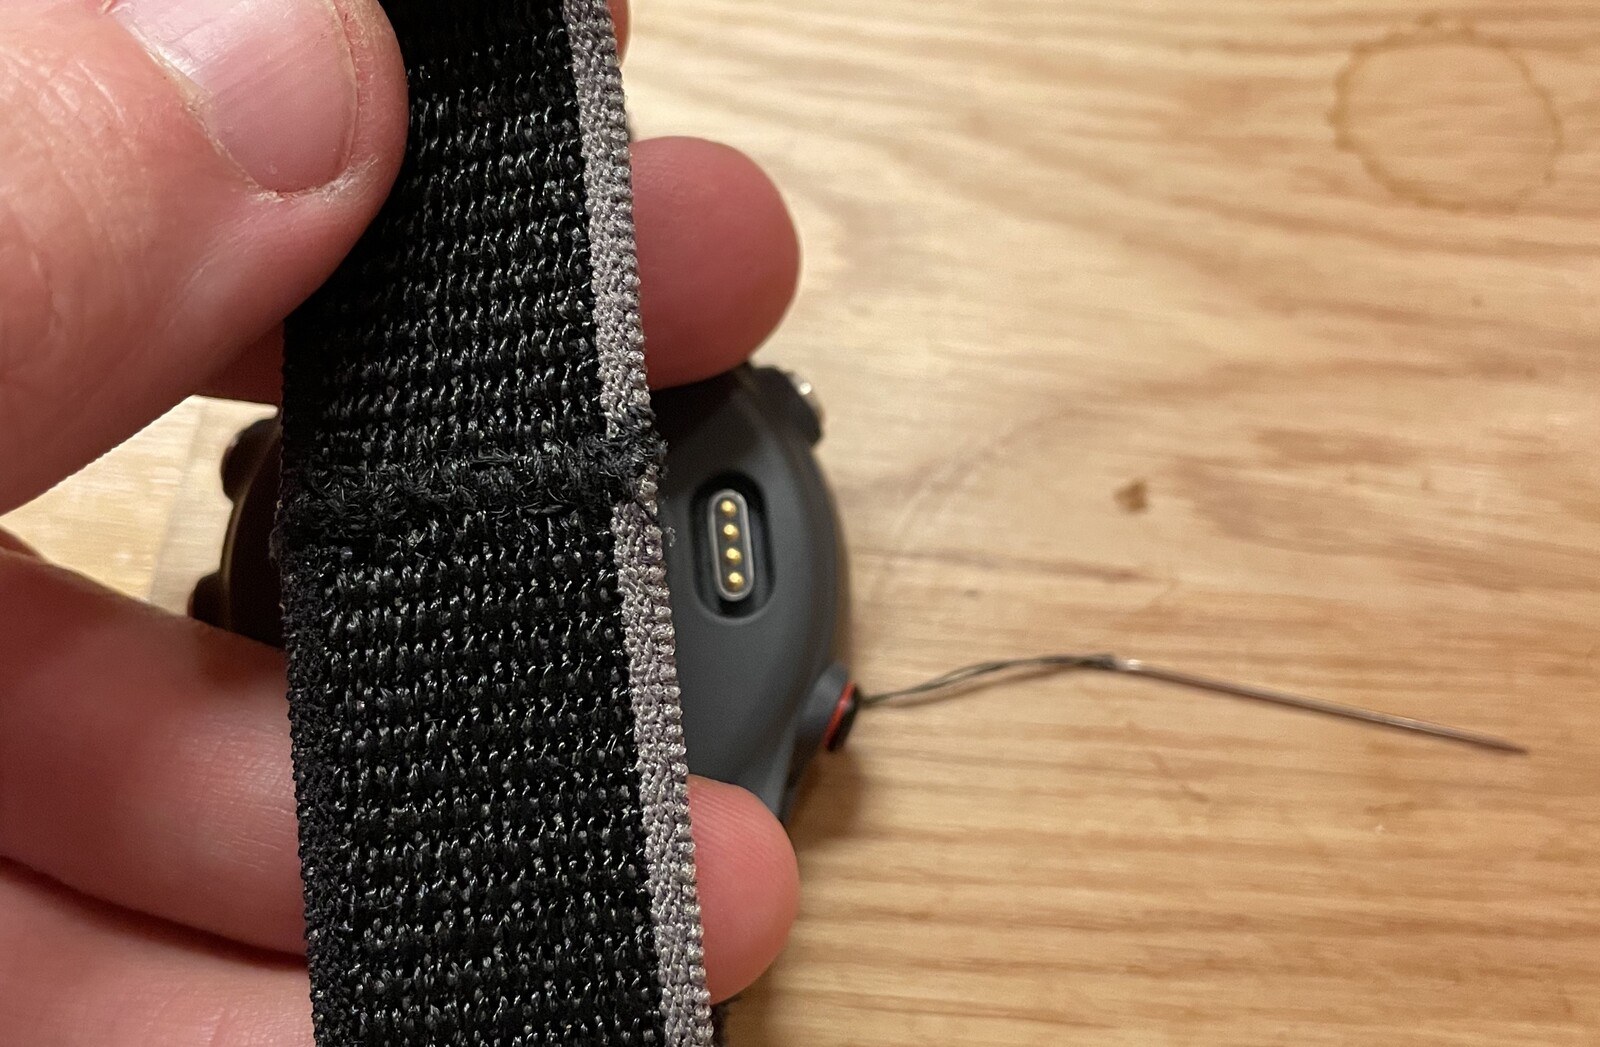 Holding a fabric watch wristband up to the camera, which has clearly been cut in half and stitched back together, albeit poorly